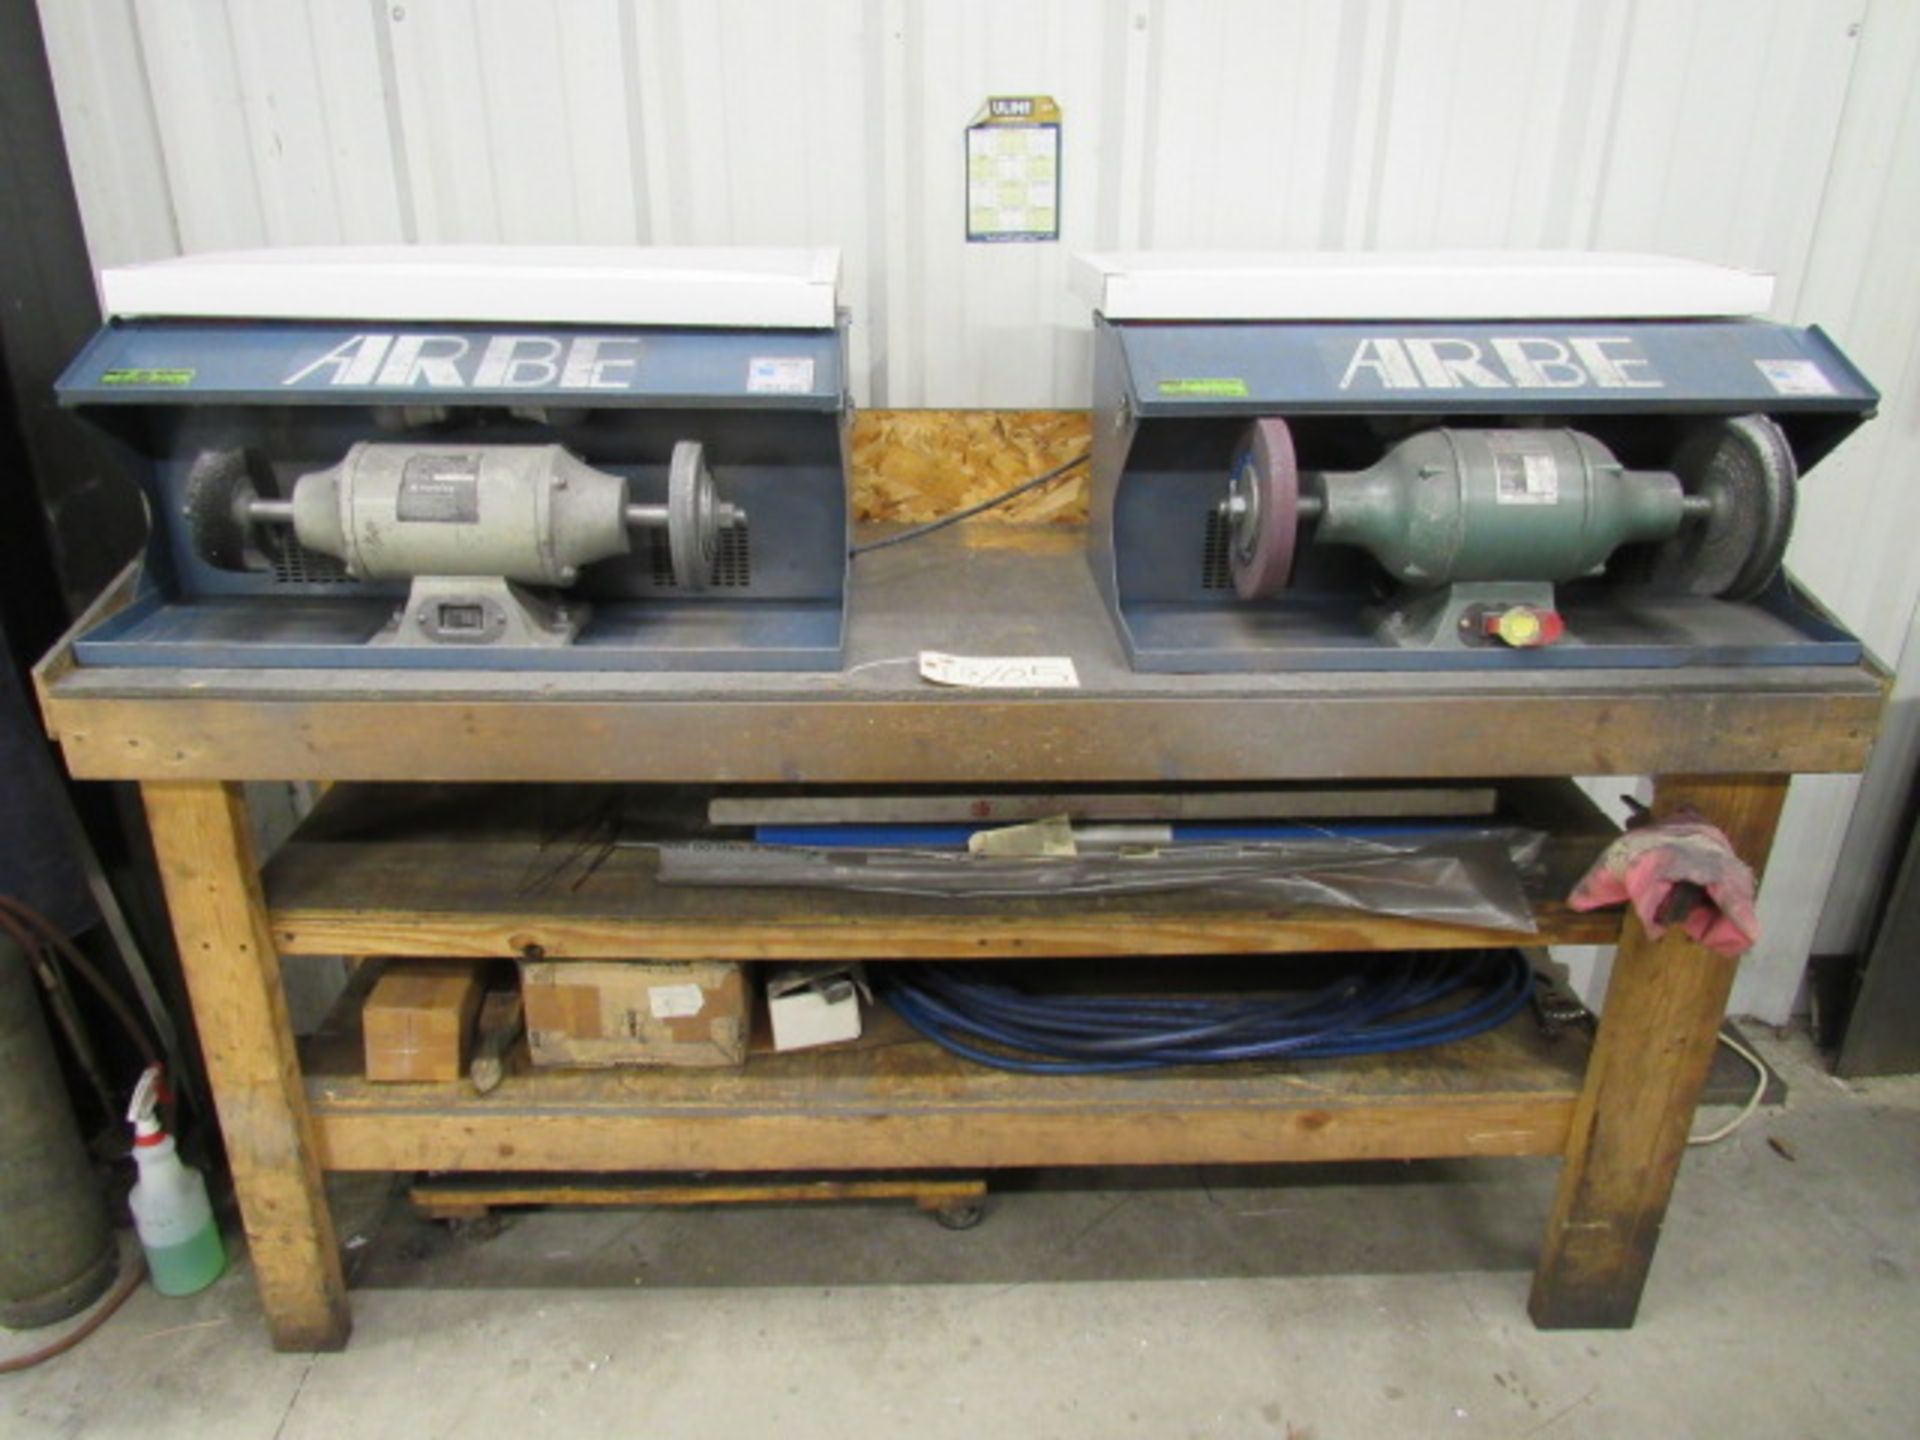 Workbench with (2) Arbe 8'' Grinders